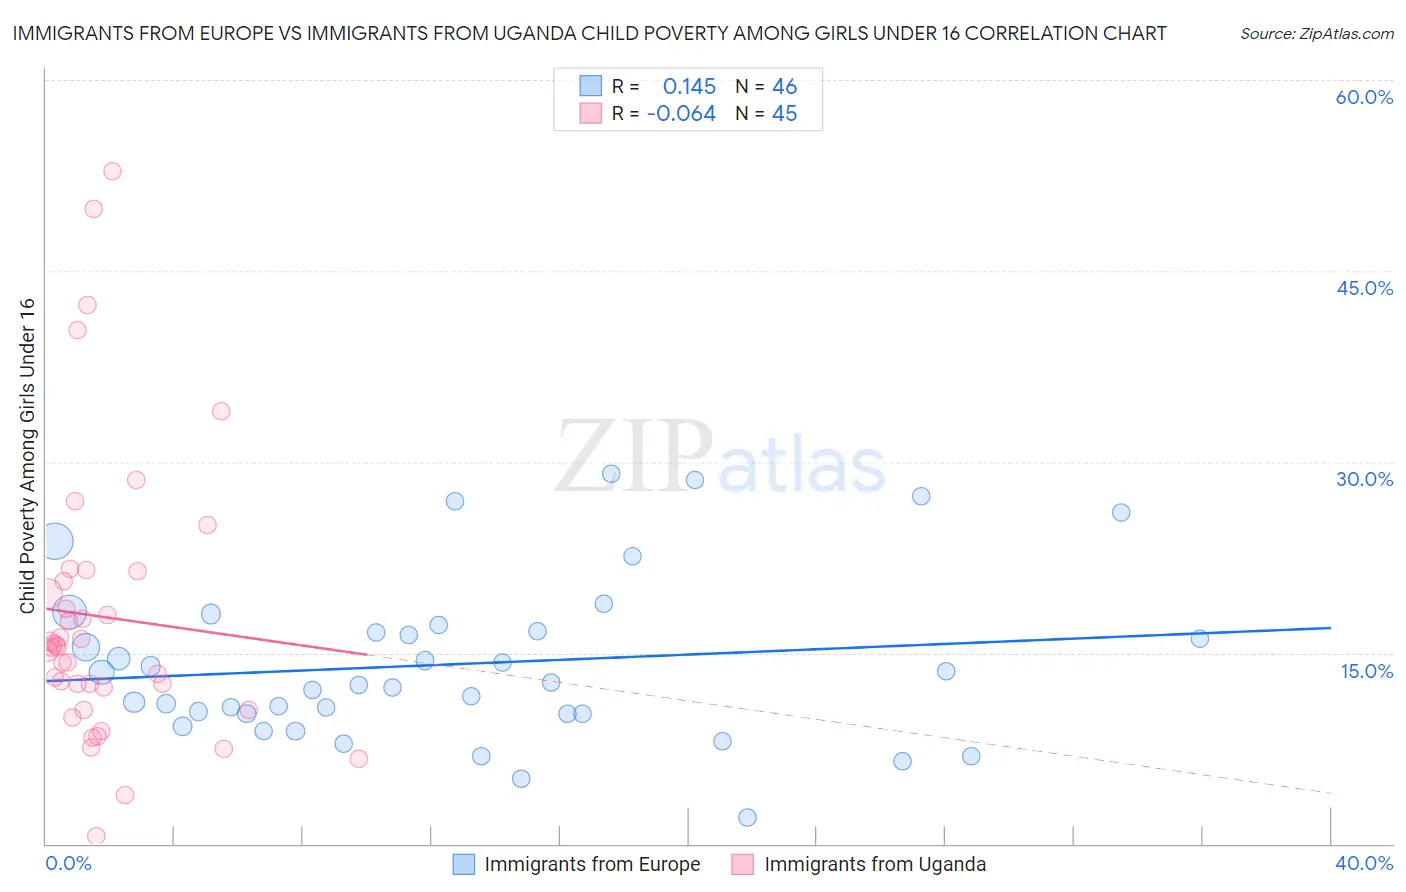 Immigrants from Europe vs Immigrants from Uganda Child Poverty Among Girls Under 16